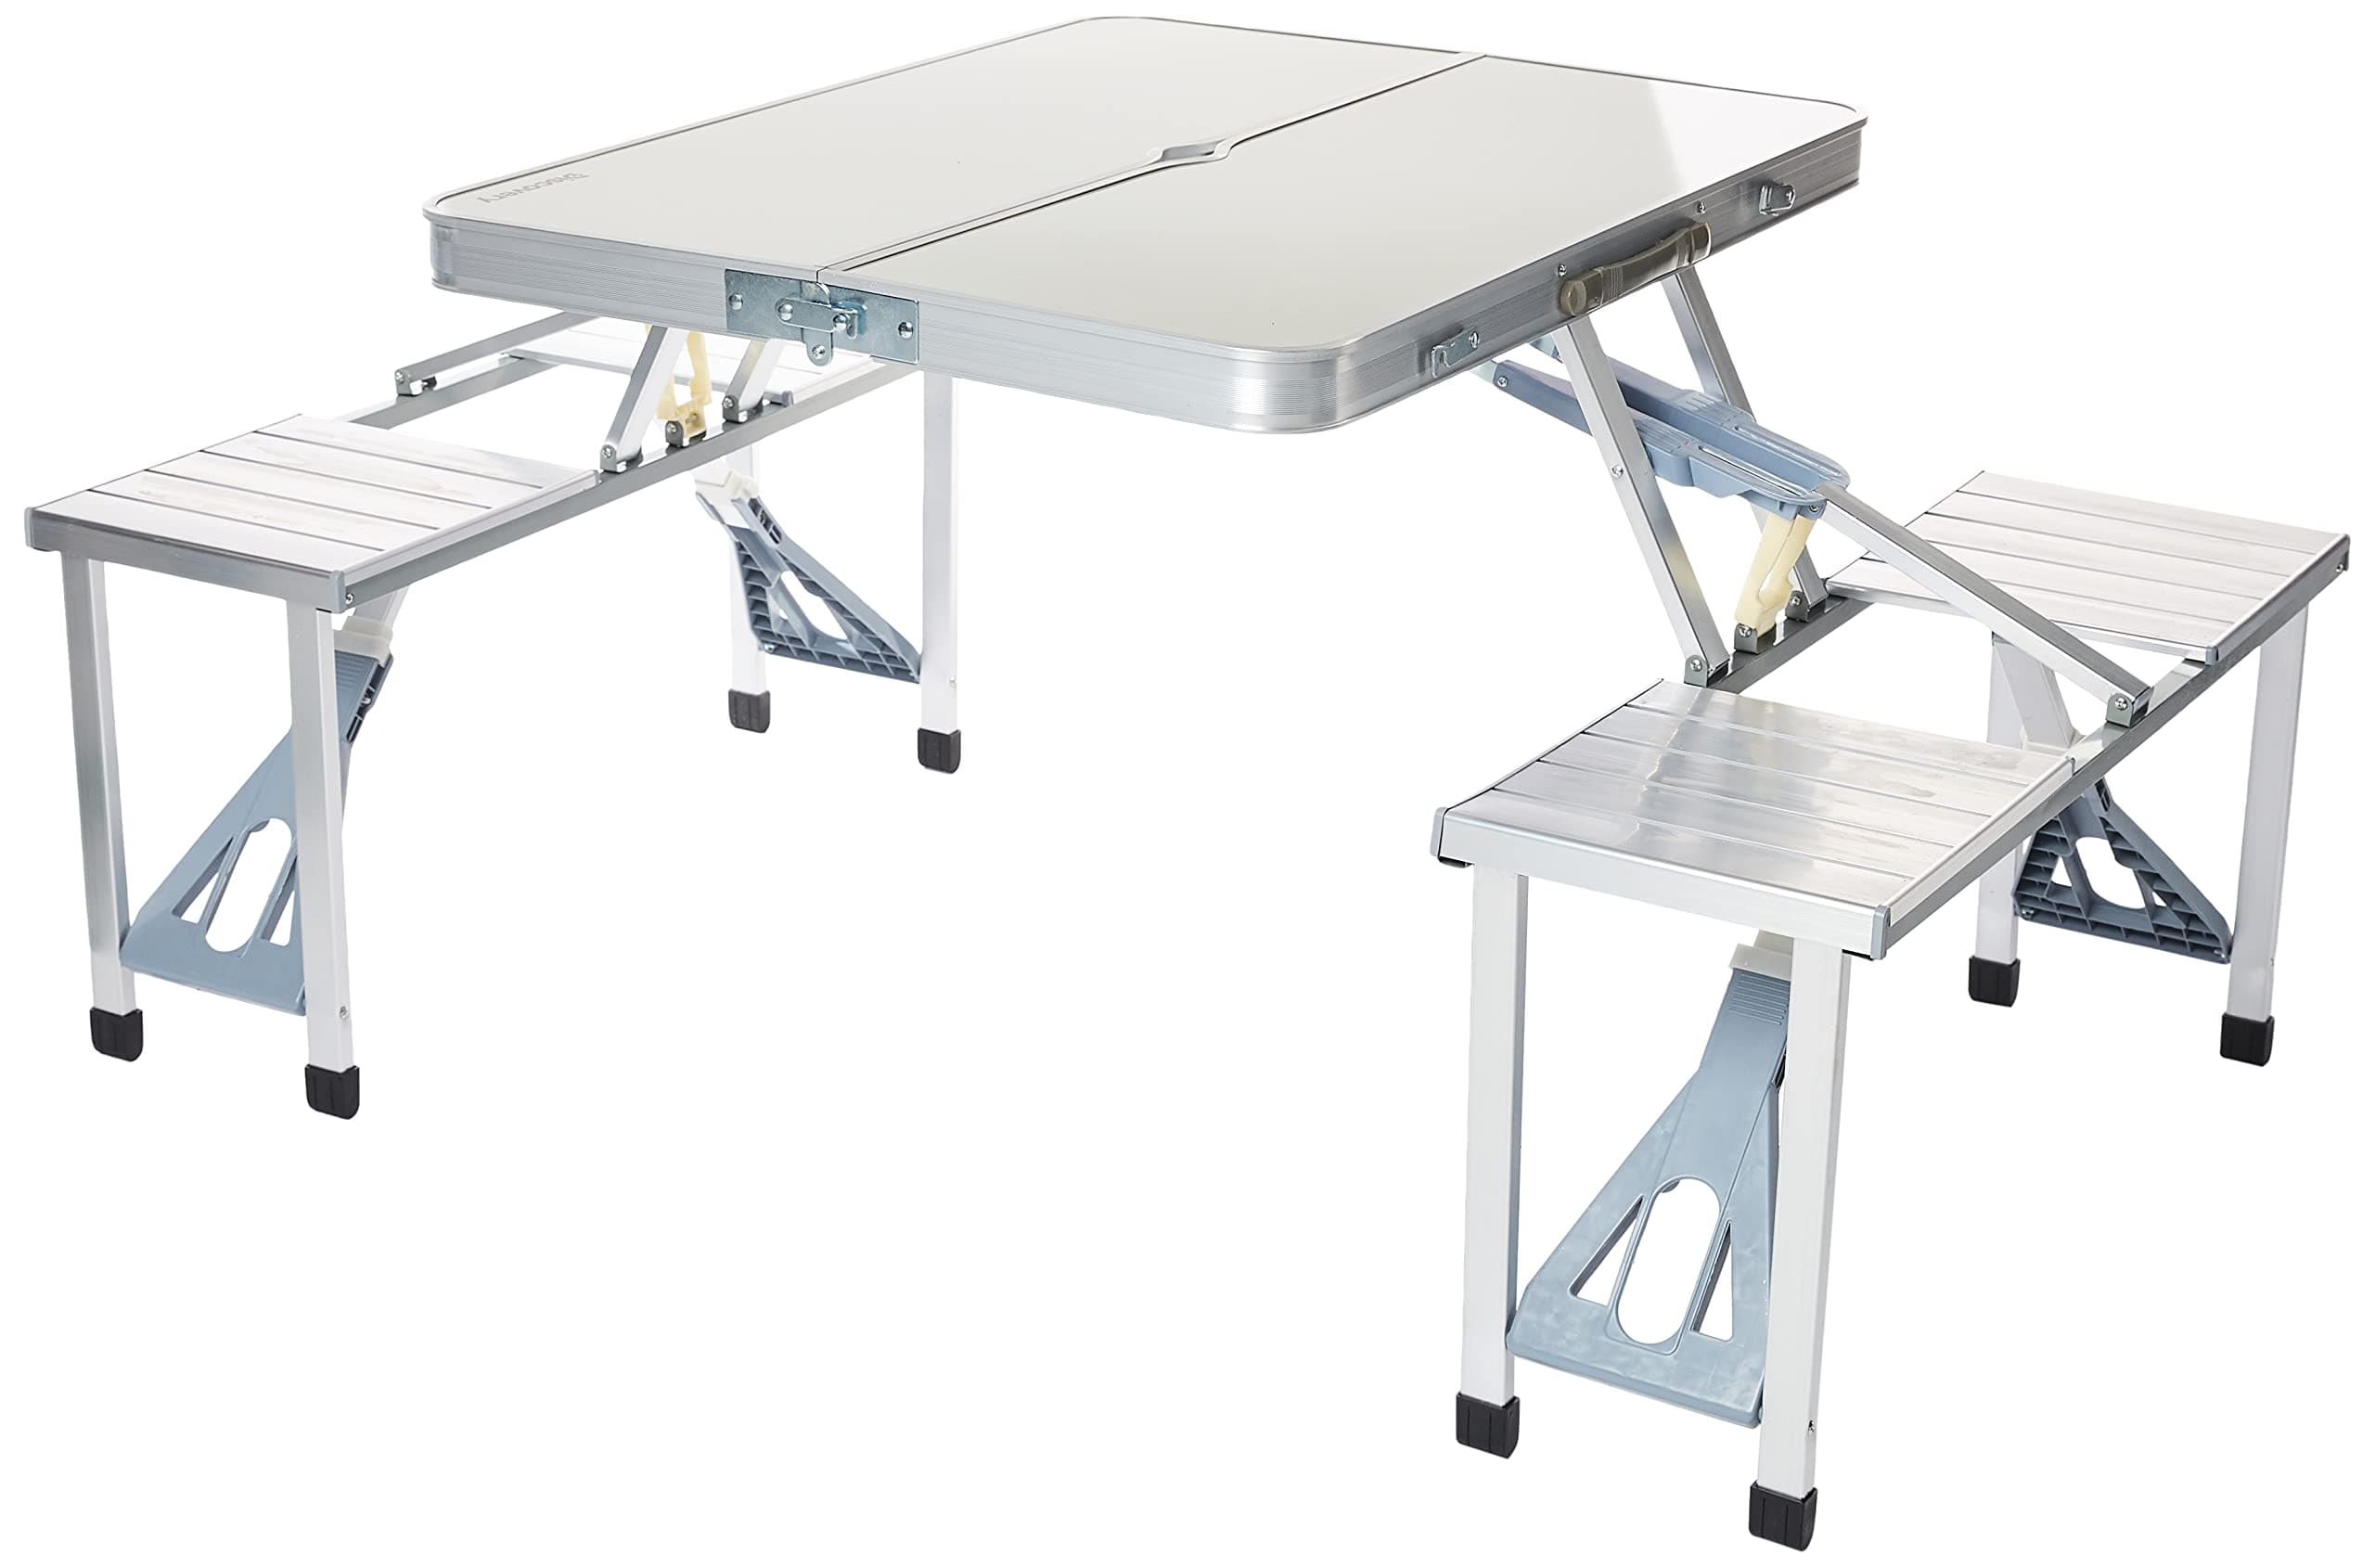 Shop for Discovery Aluminium Picnic Table on outback.ae